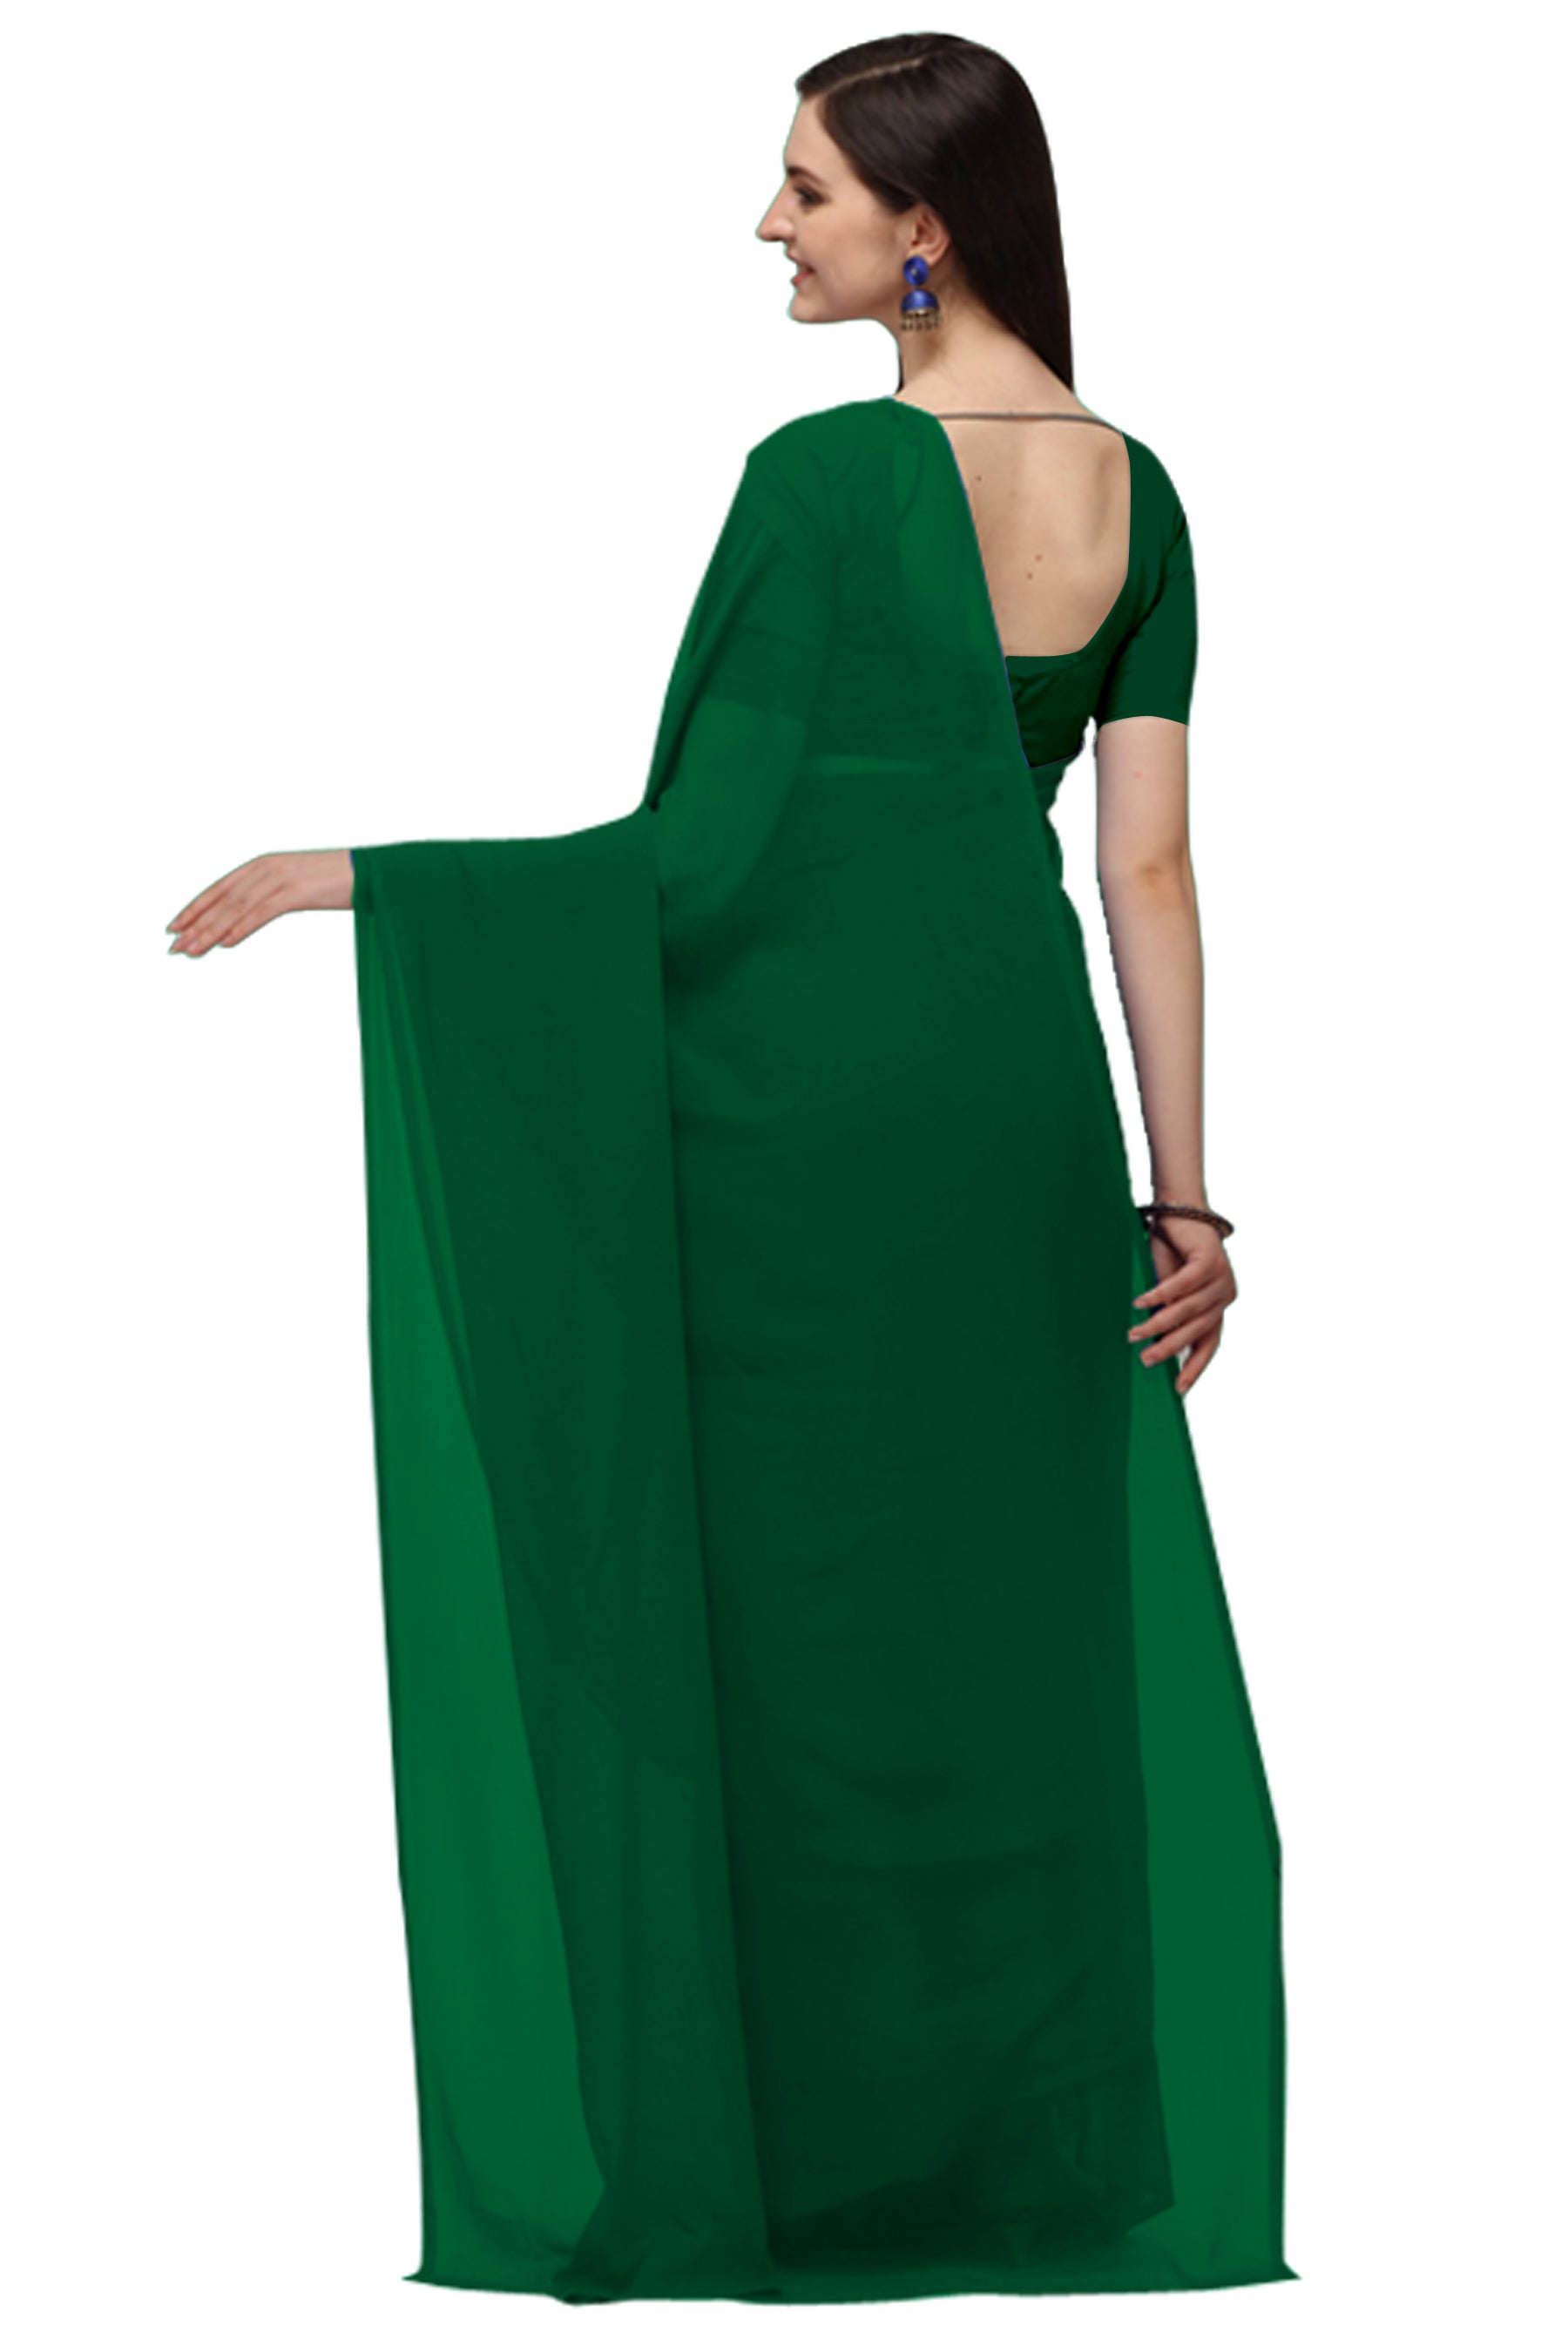 Women's Plain Woven Daily Wear  Formal Georgette Sari With Blouse Piece (Dark Green) - NIMIDHYA